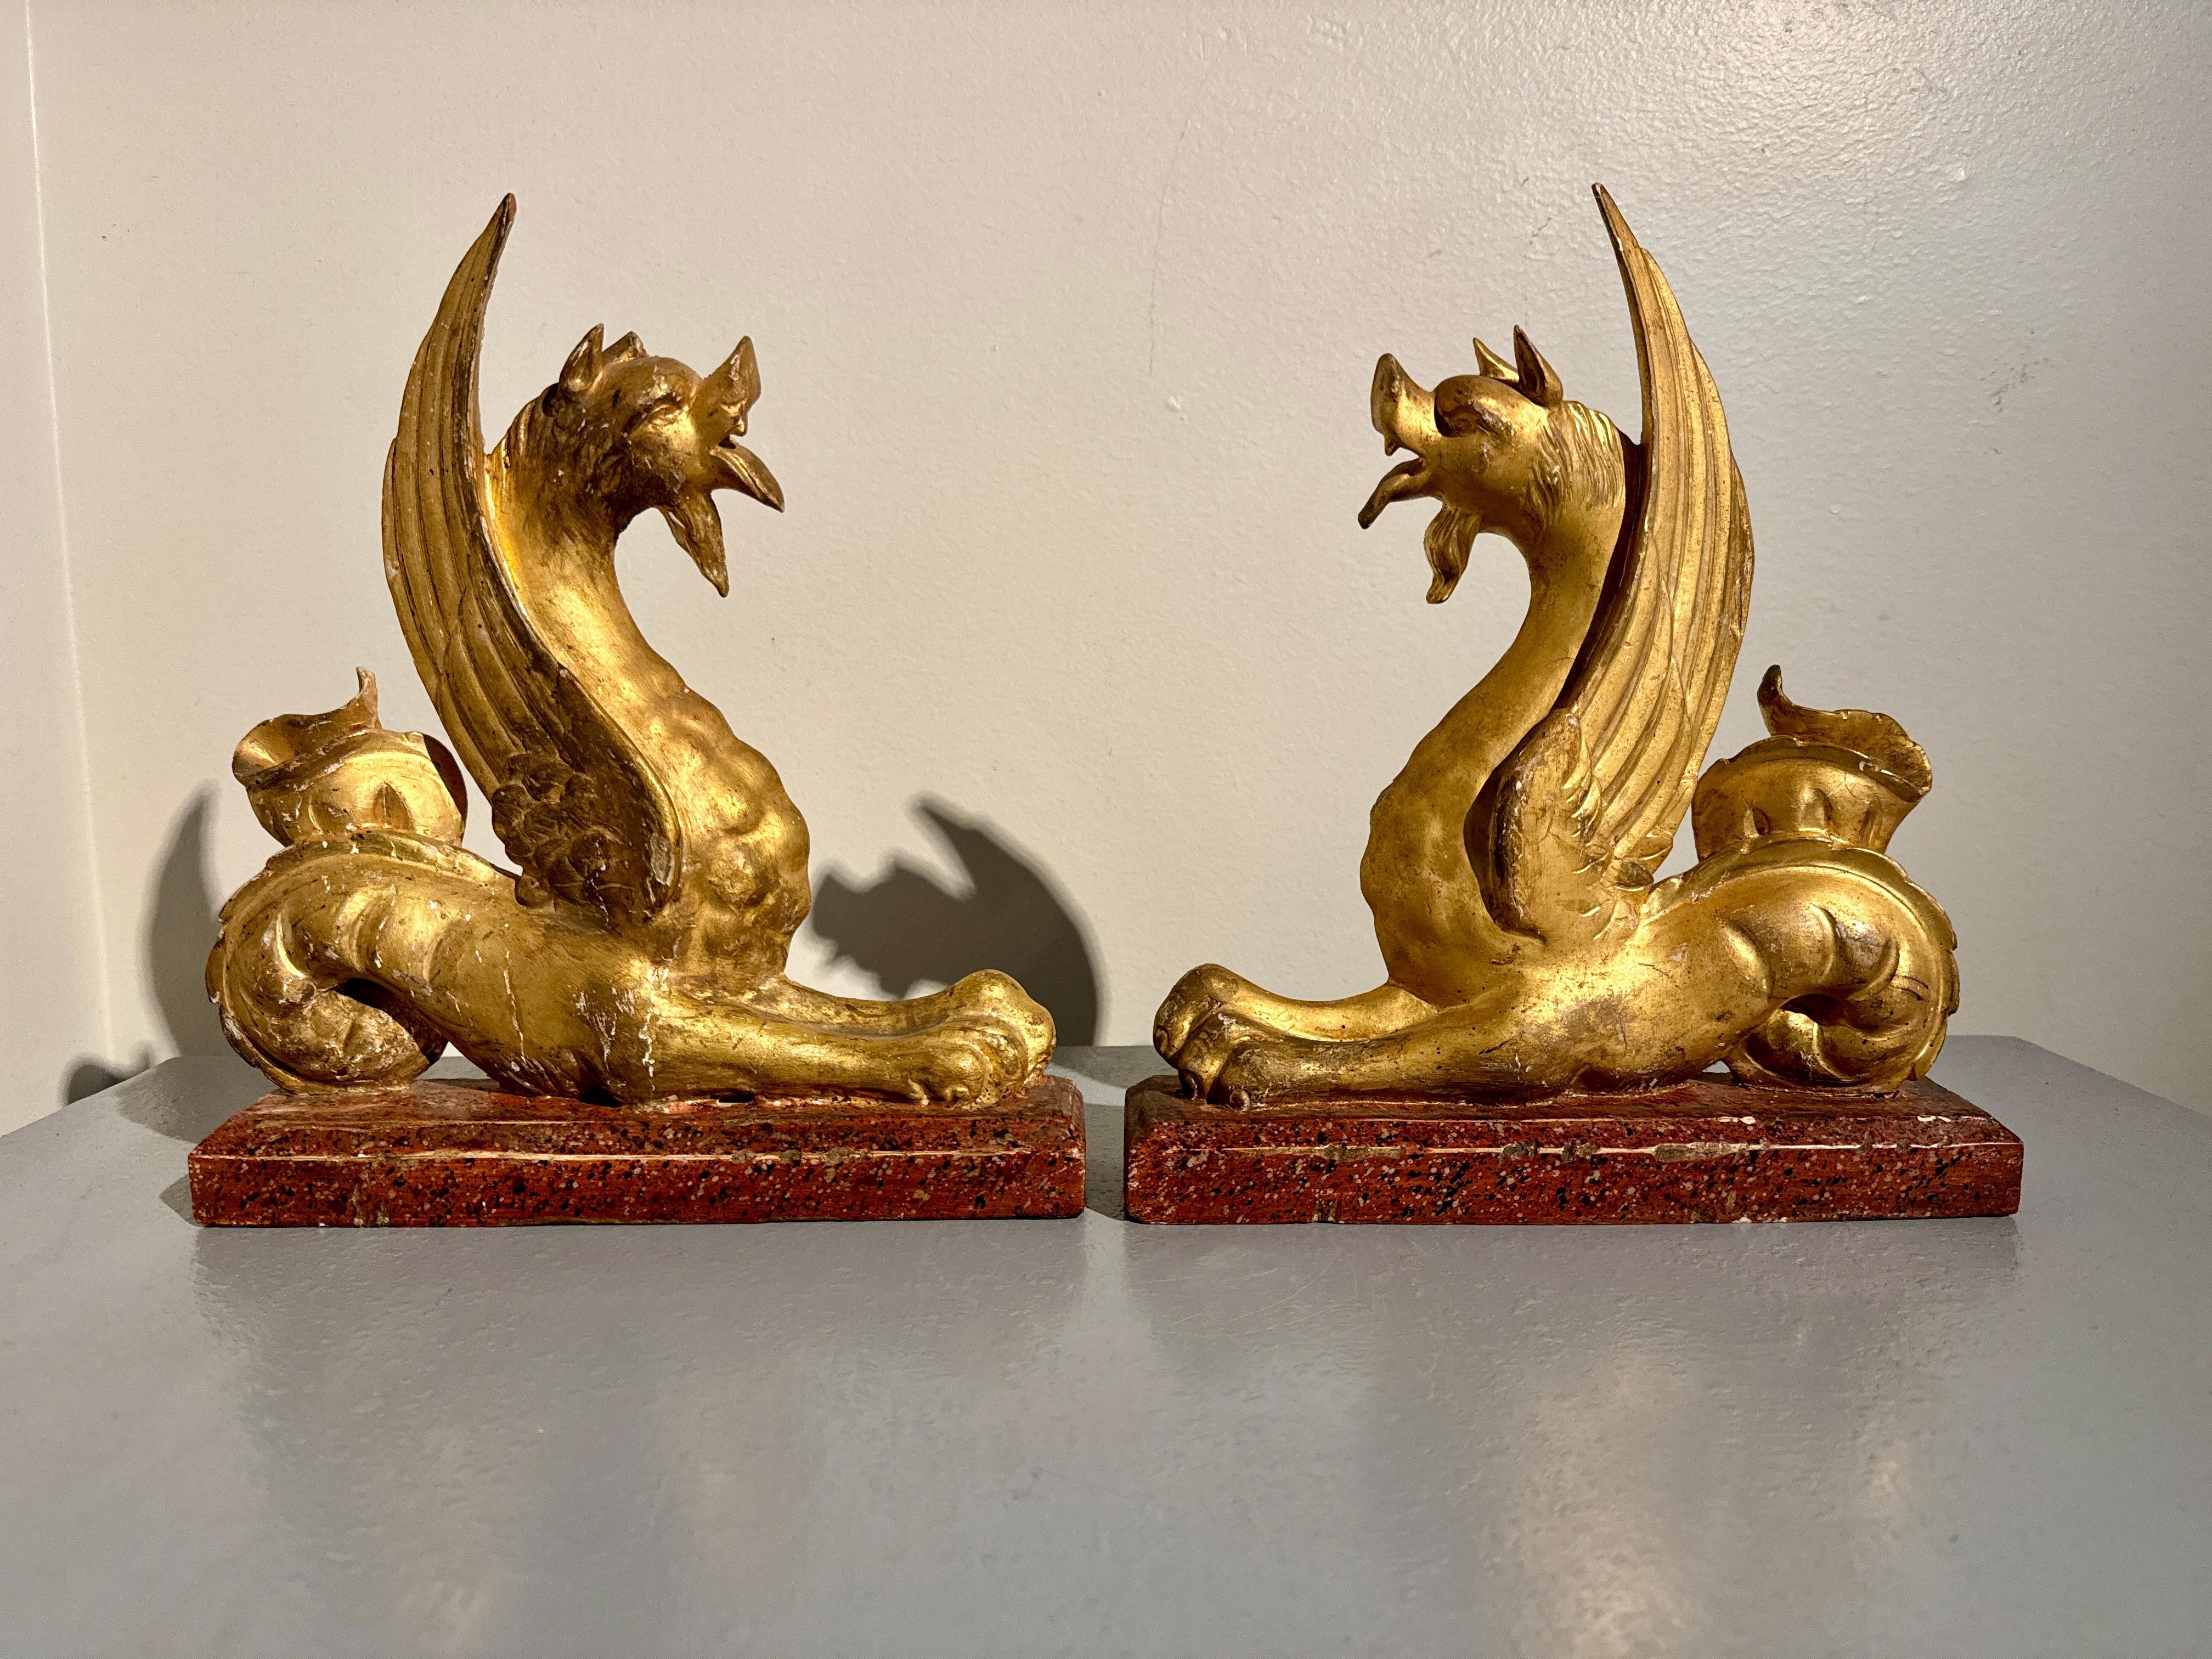 A powerful and dramatic pair of Italian neoclassical carved and gilt wood mythical animal figures on faux painted bases, mid 19th century or earlier, Italy.

The fantastic beasts are well carved, with dramatic wings that follow the sensuous curve of